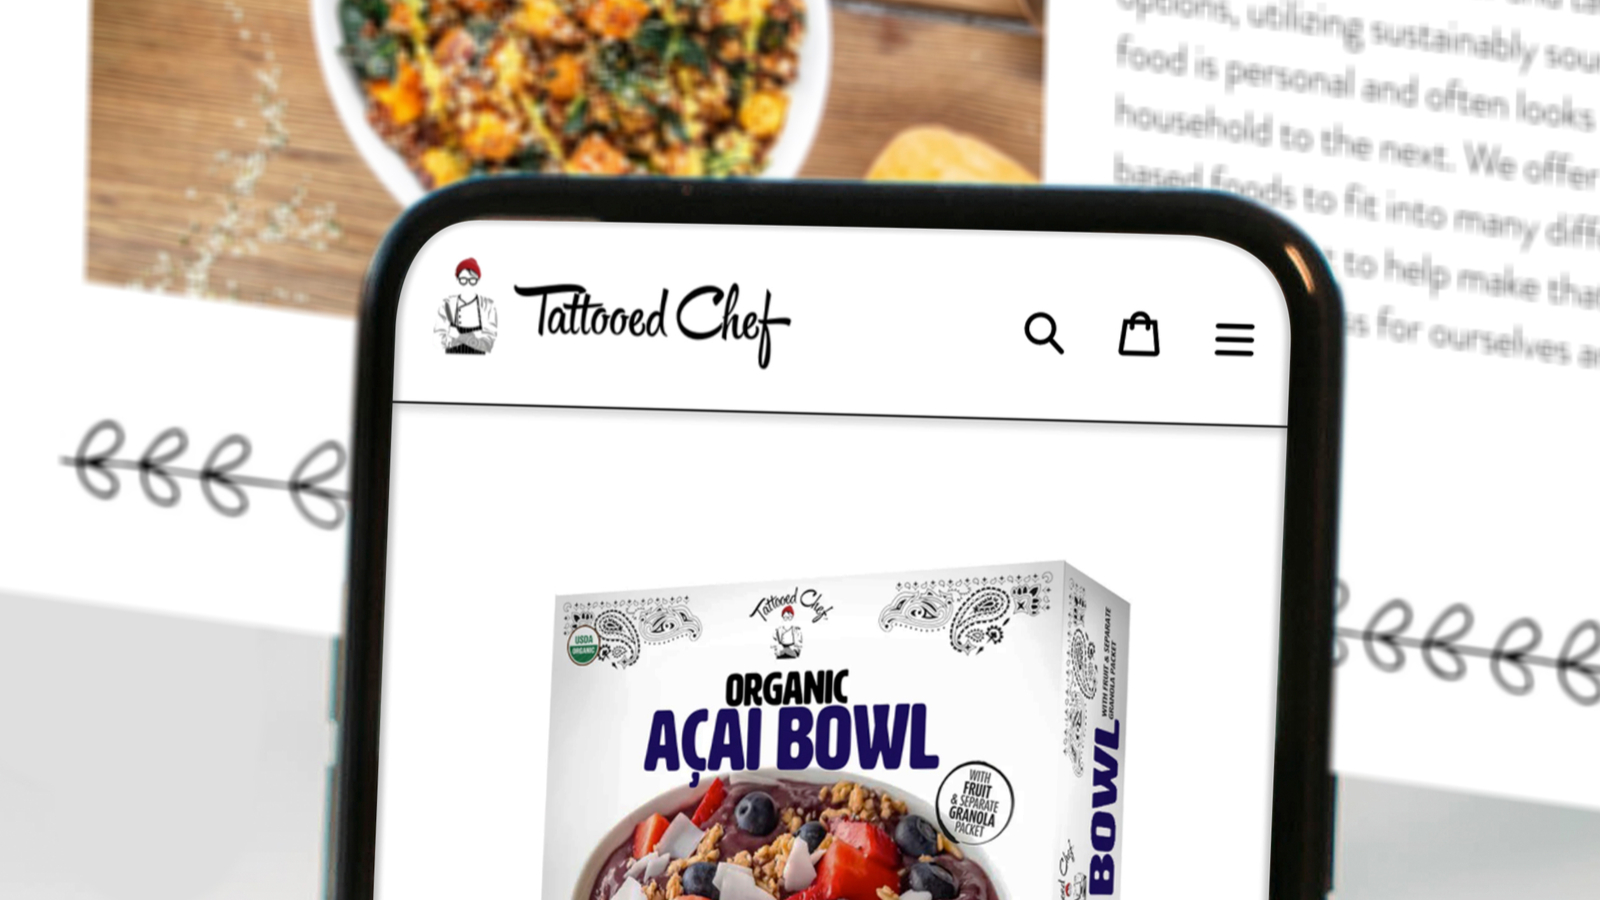 TTCF Stock. Information about a Tattooed Chef acai bowl is shown on a phone.